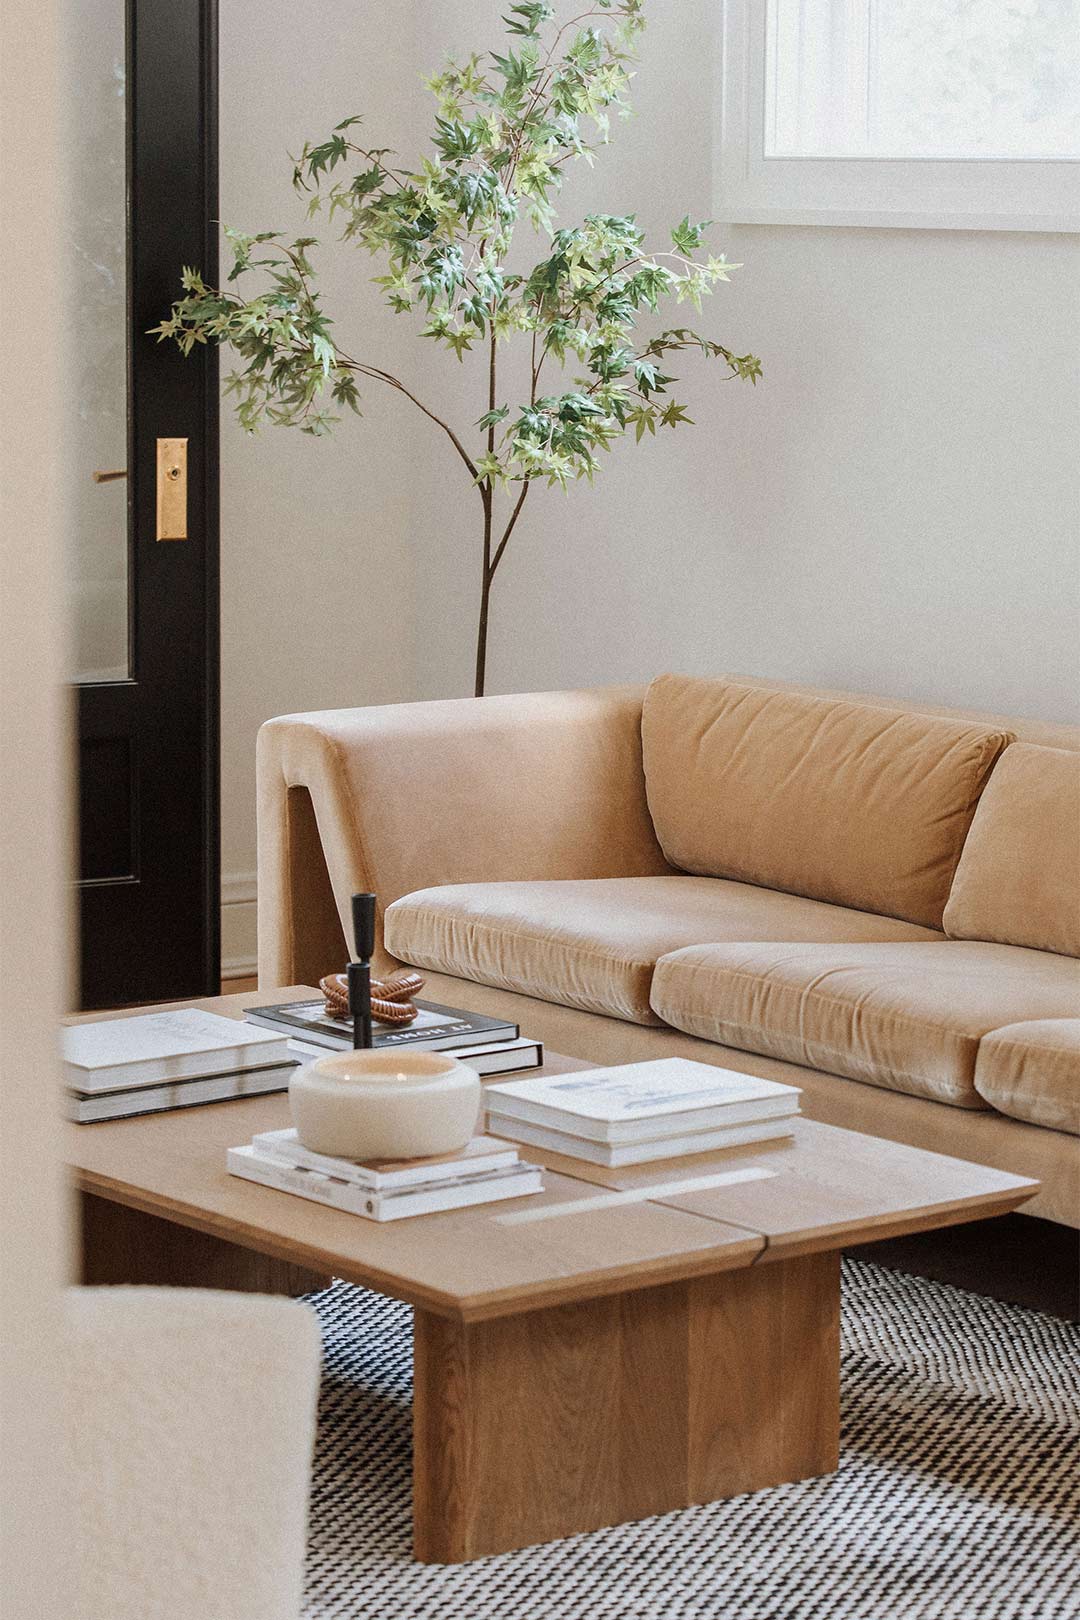 Neutral tone organic modern sofa in a transitional designed living room by J. Reiko Design + Co